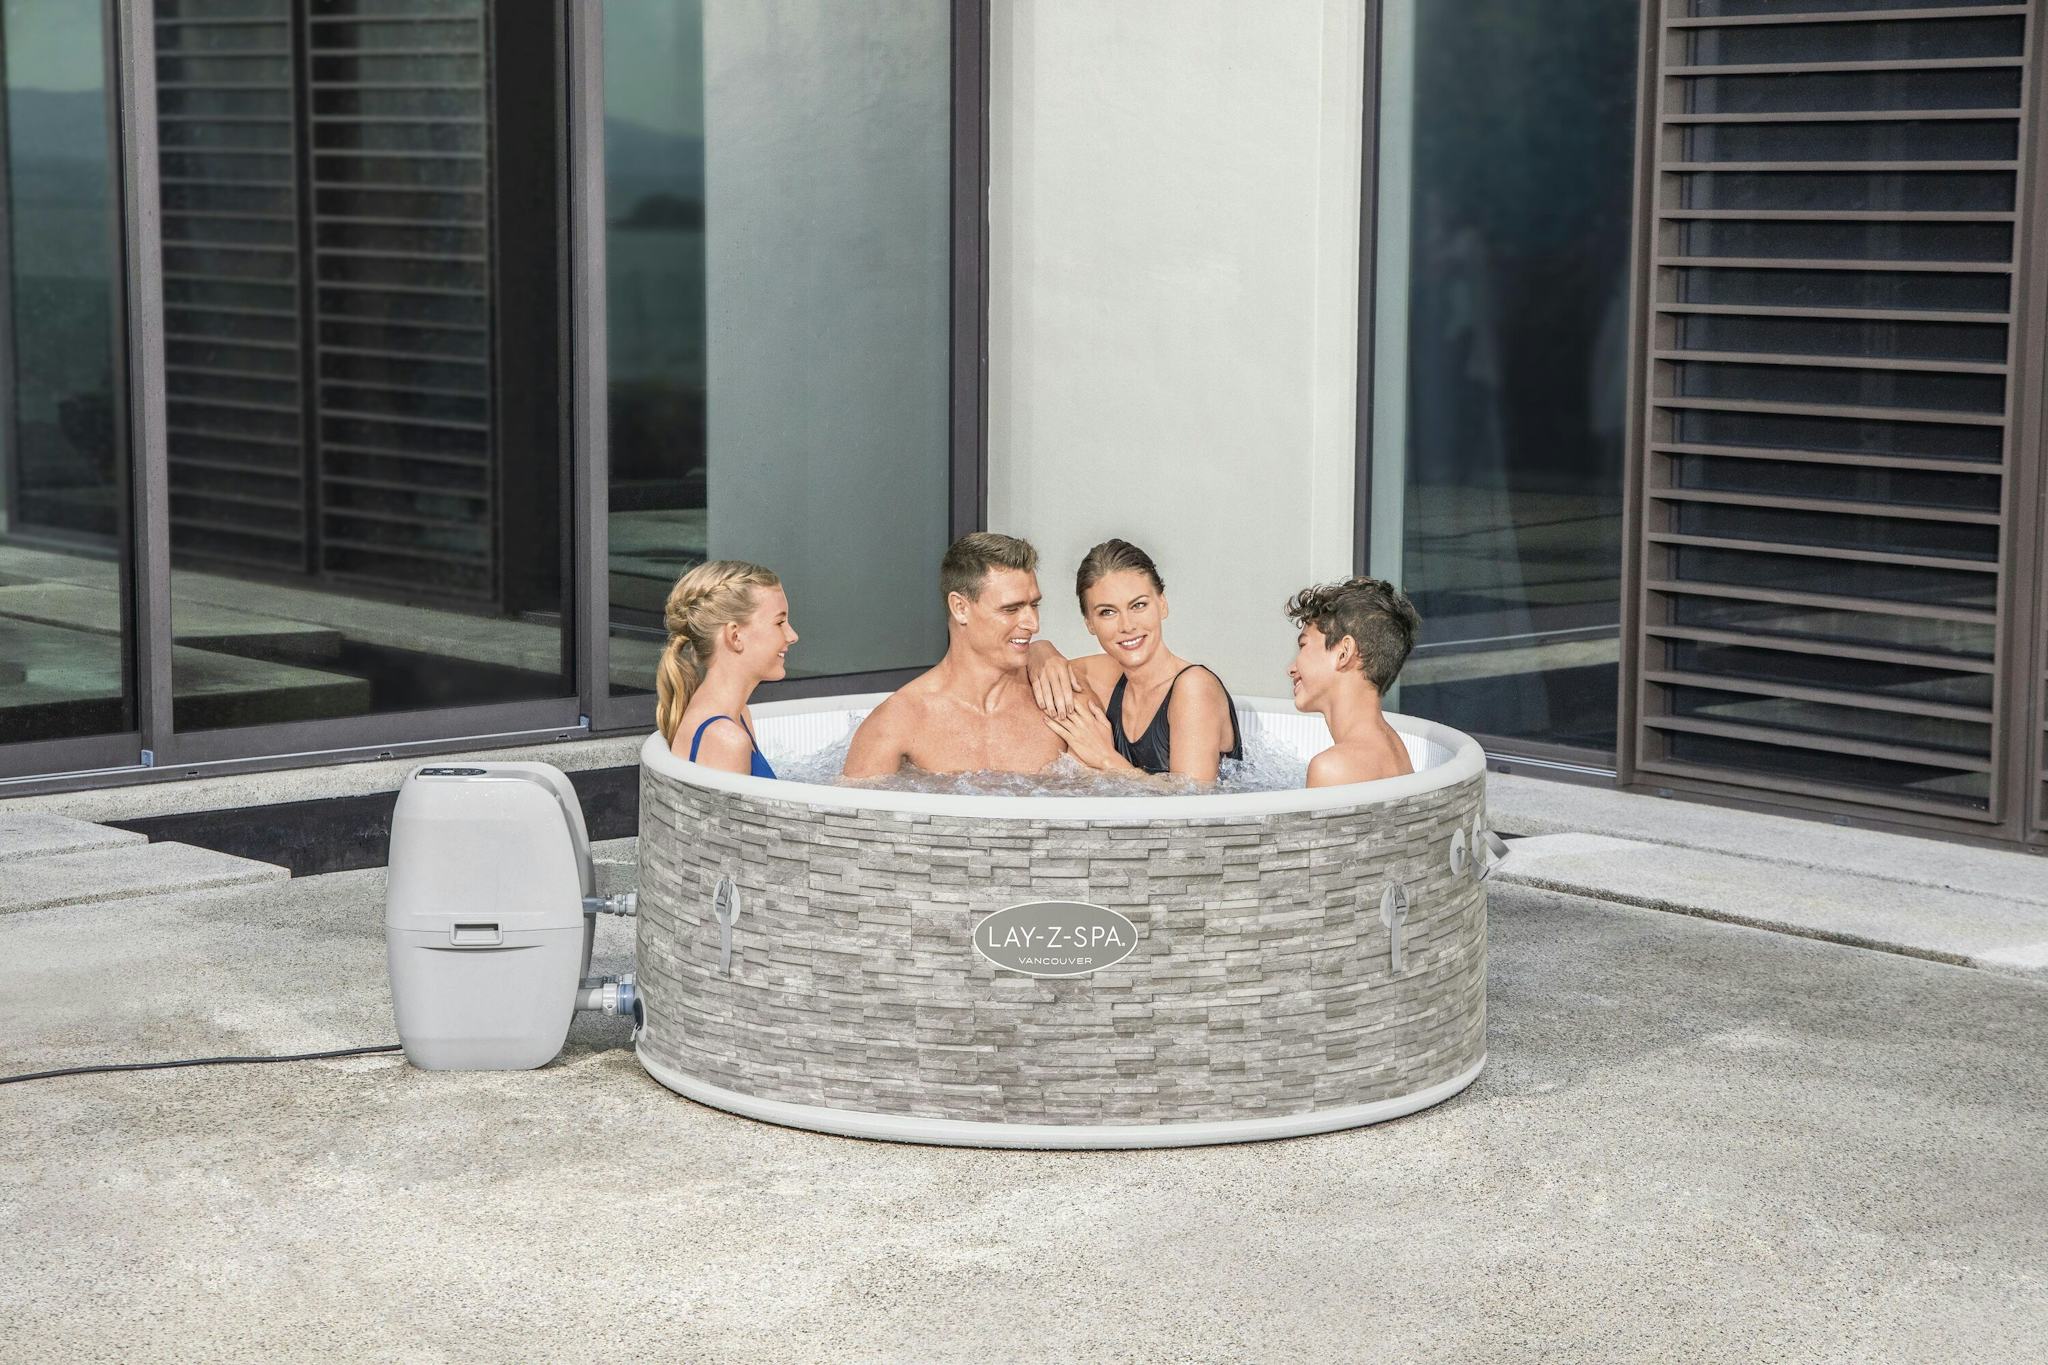 Spas Gonflables Spa gonflable rond Lay-Z-Spa® Vancouver Airjet Plus™ 3 - 5 personnes Bestway 3